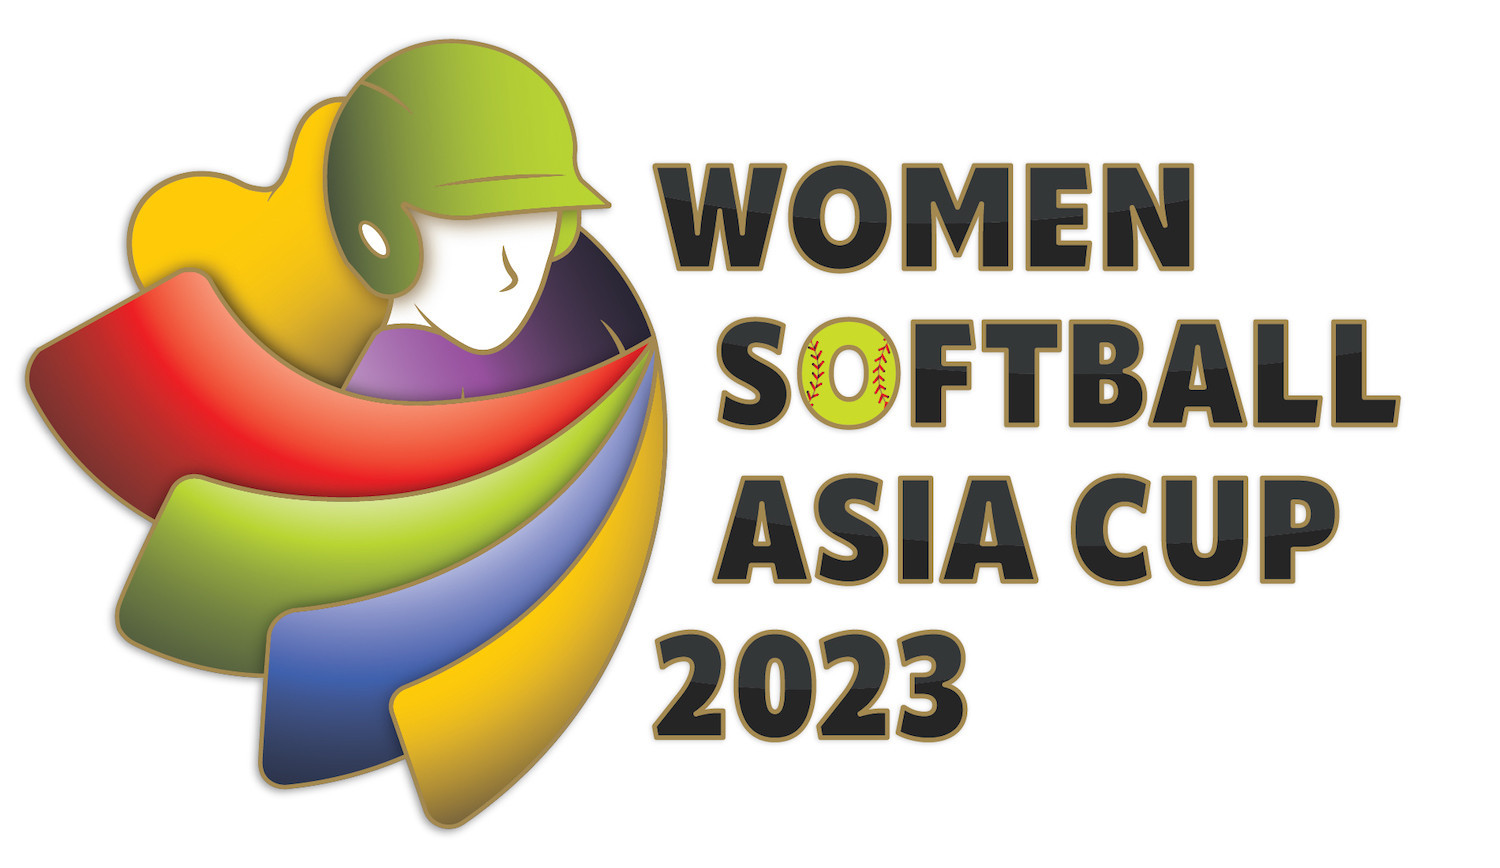 Incheon to host Women's Softball World Cup continental qualifying event